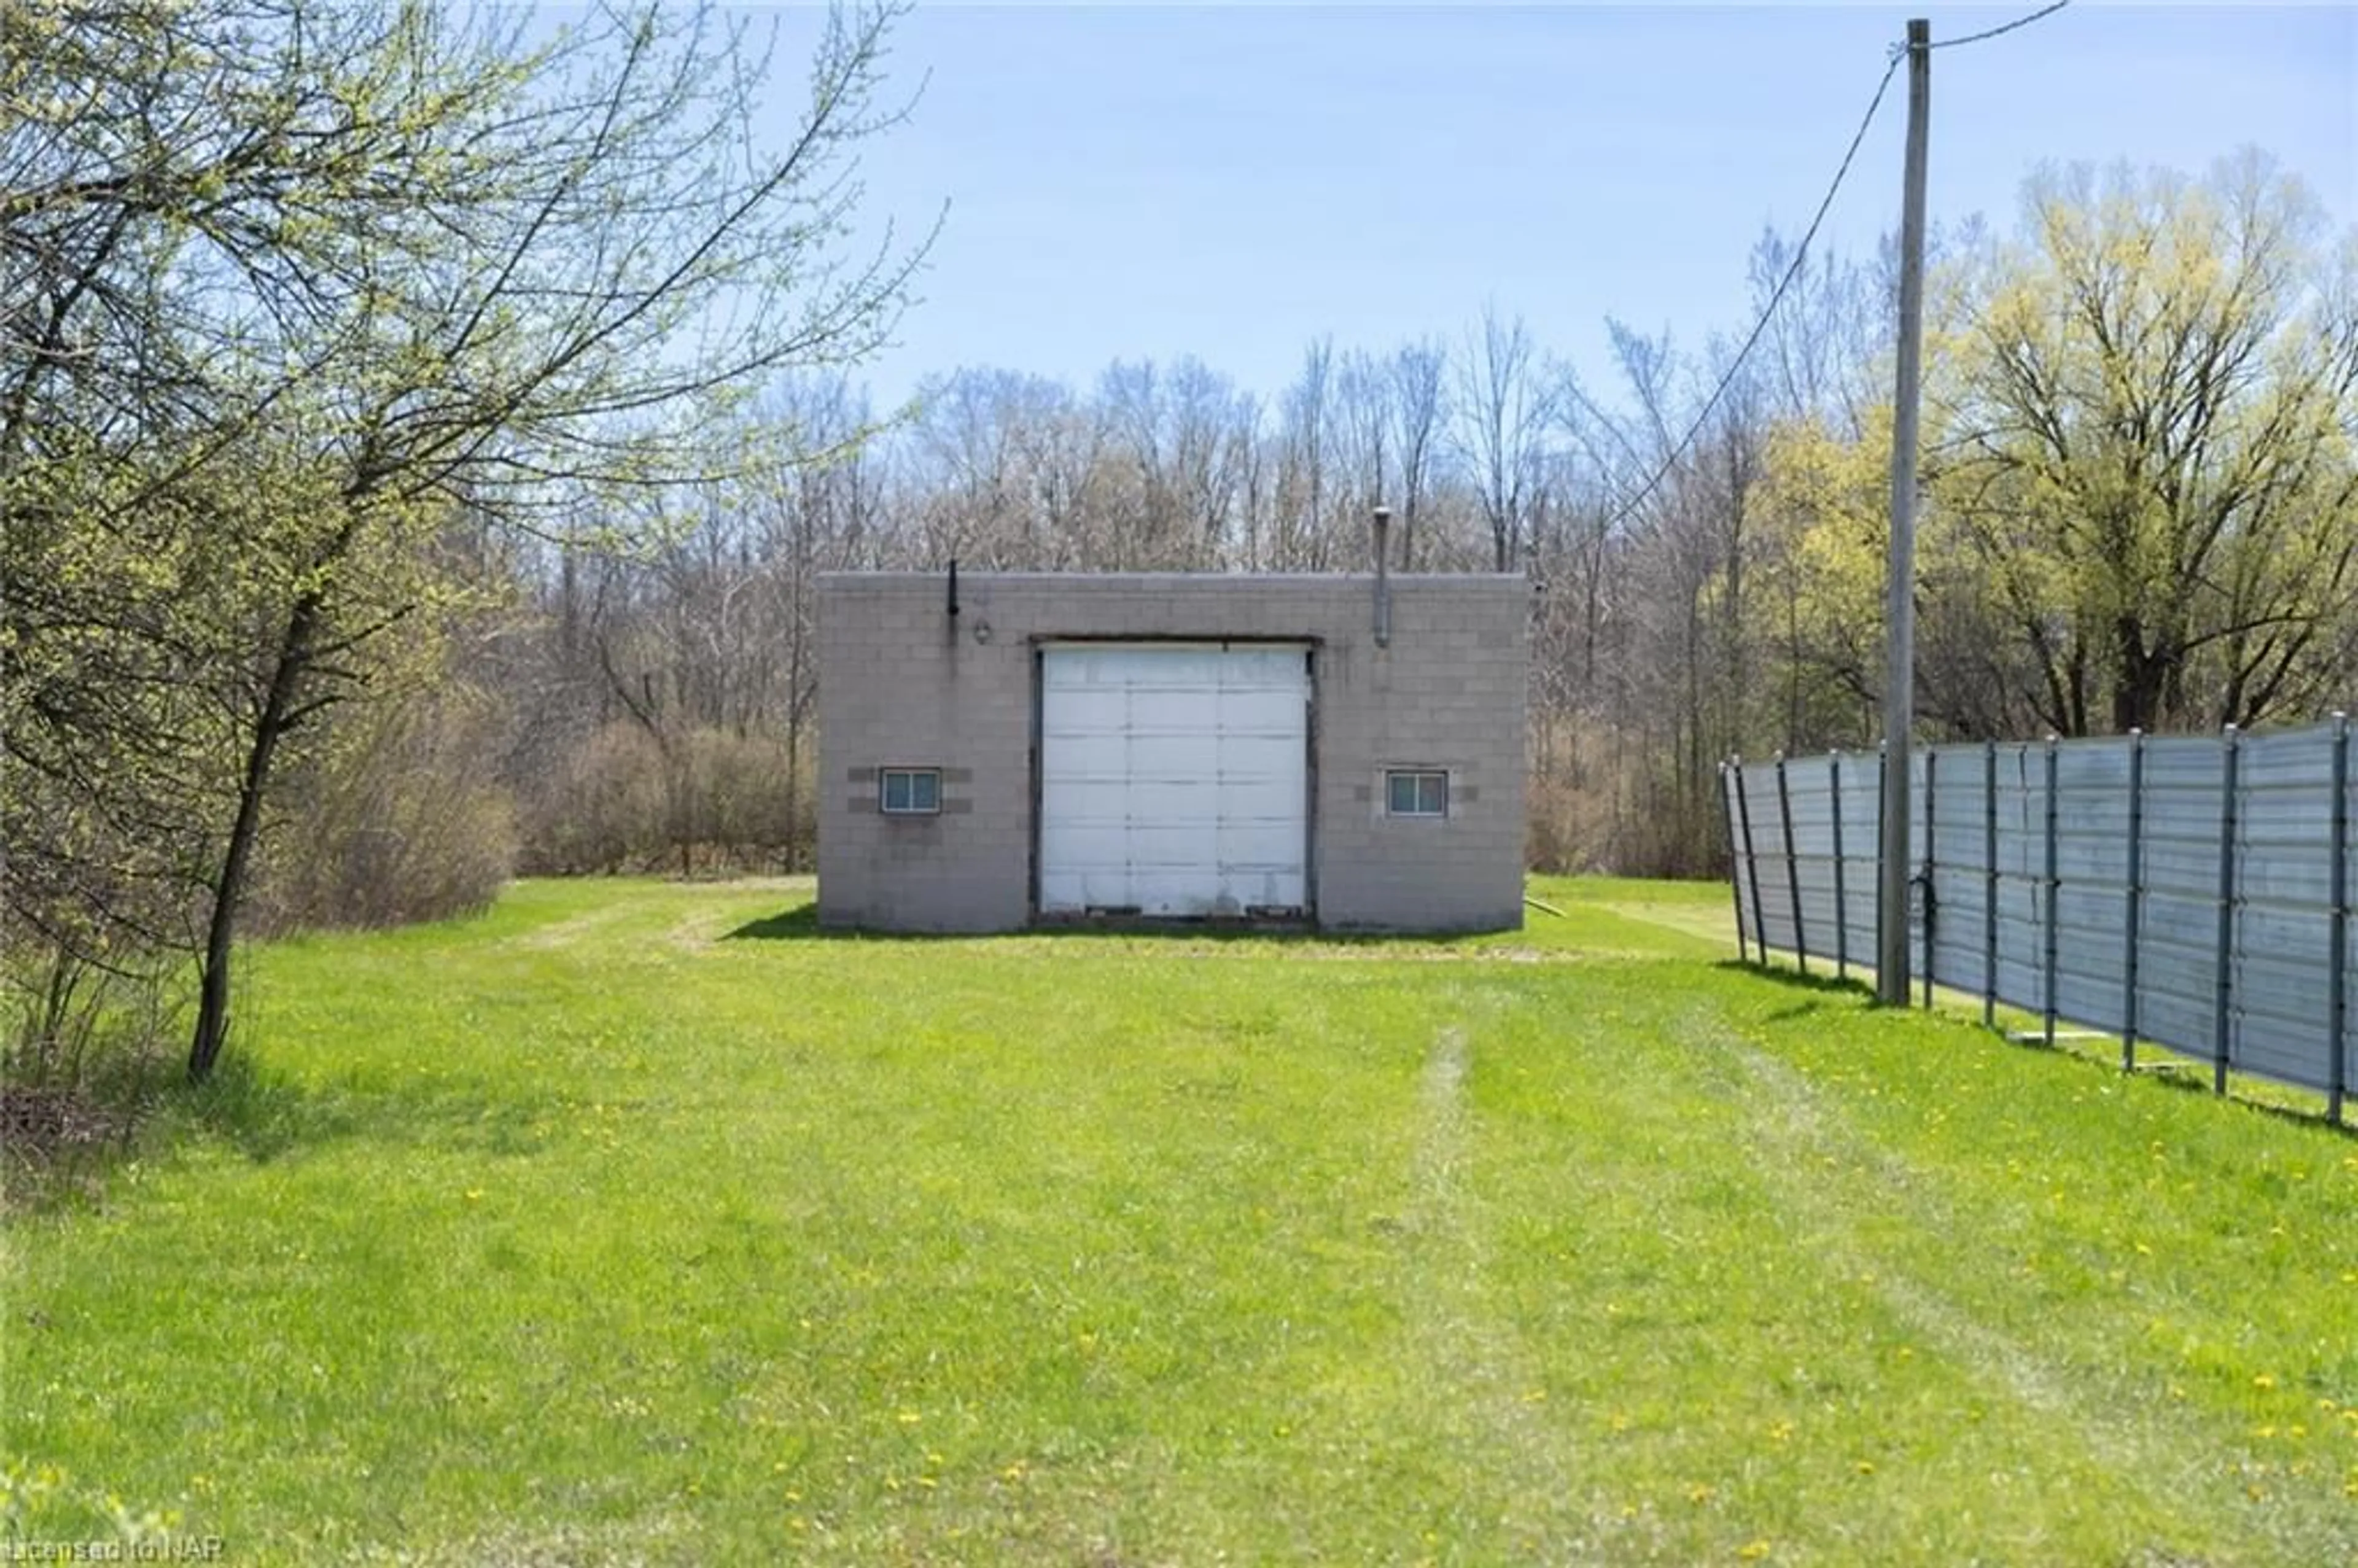 Shed for 39 Oxford Rd, Welland Ontario L3B 5N4